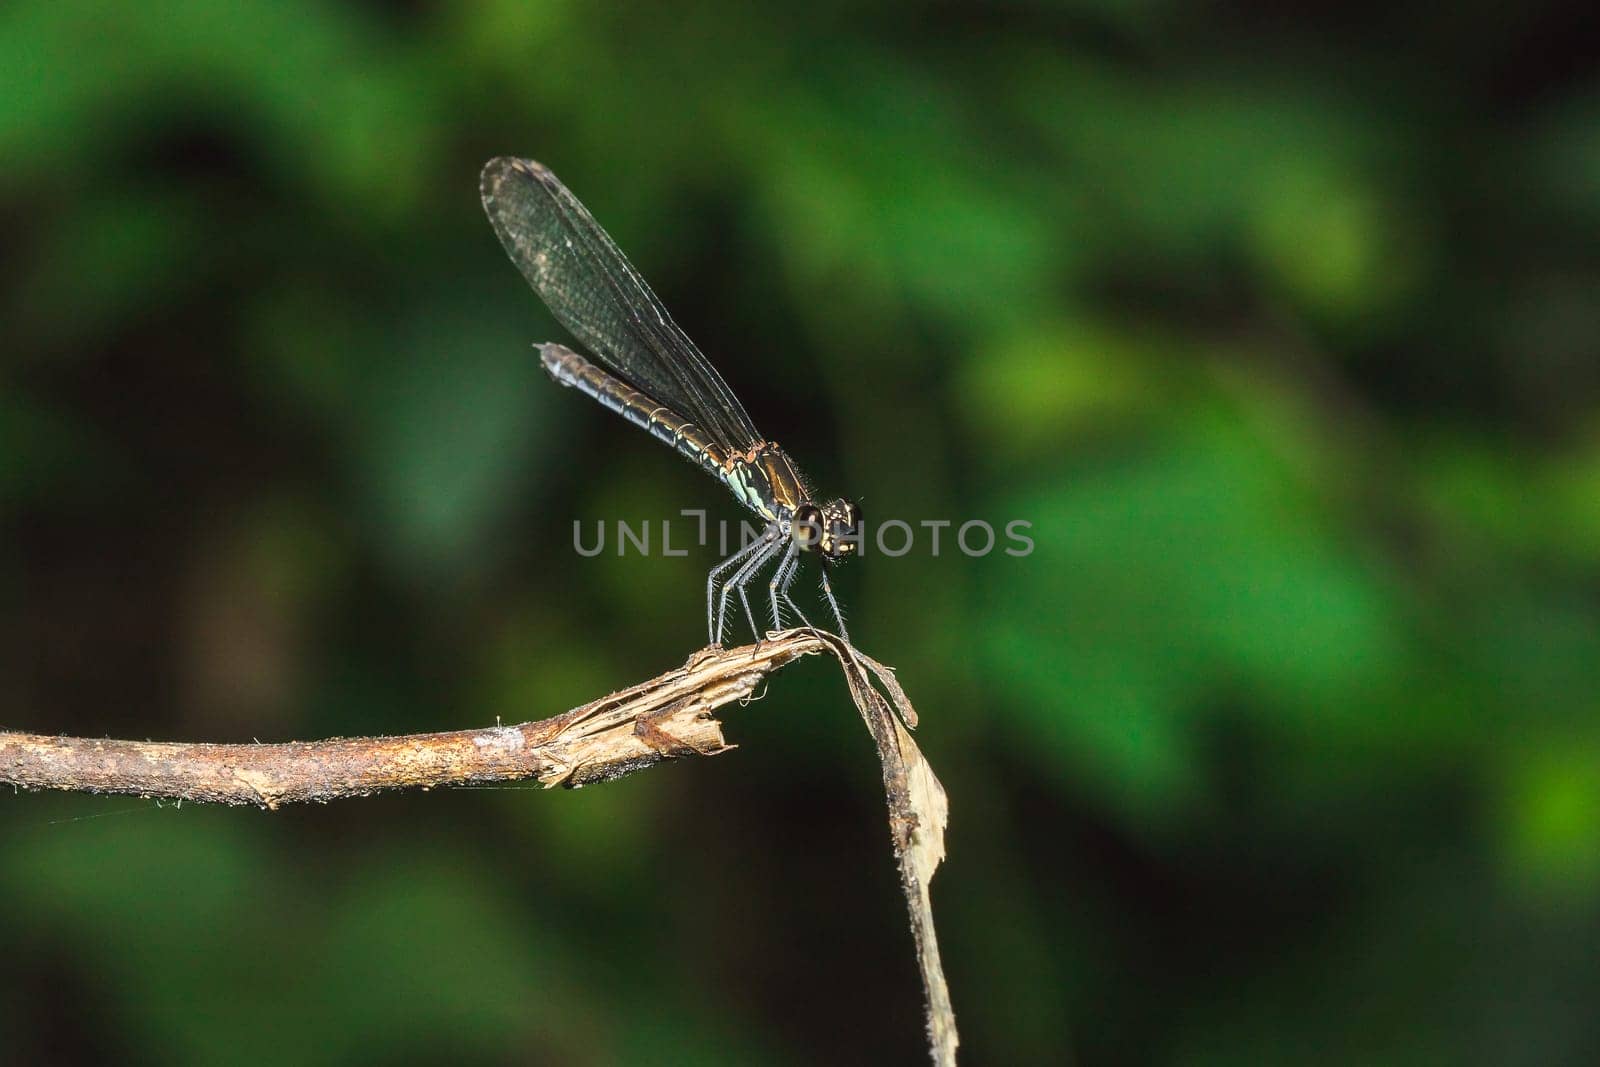 Green dragonfly On the branches in the natural forest